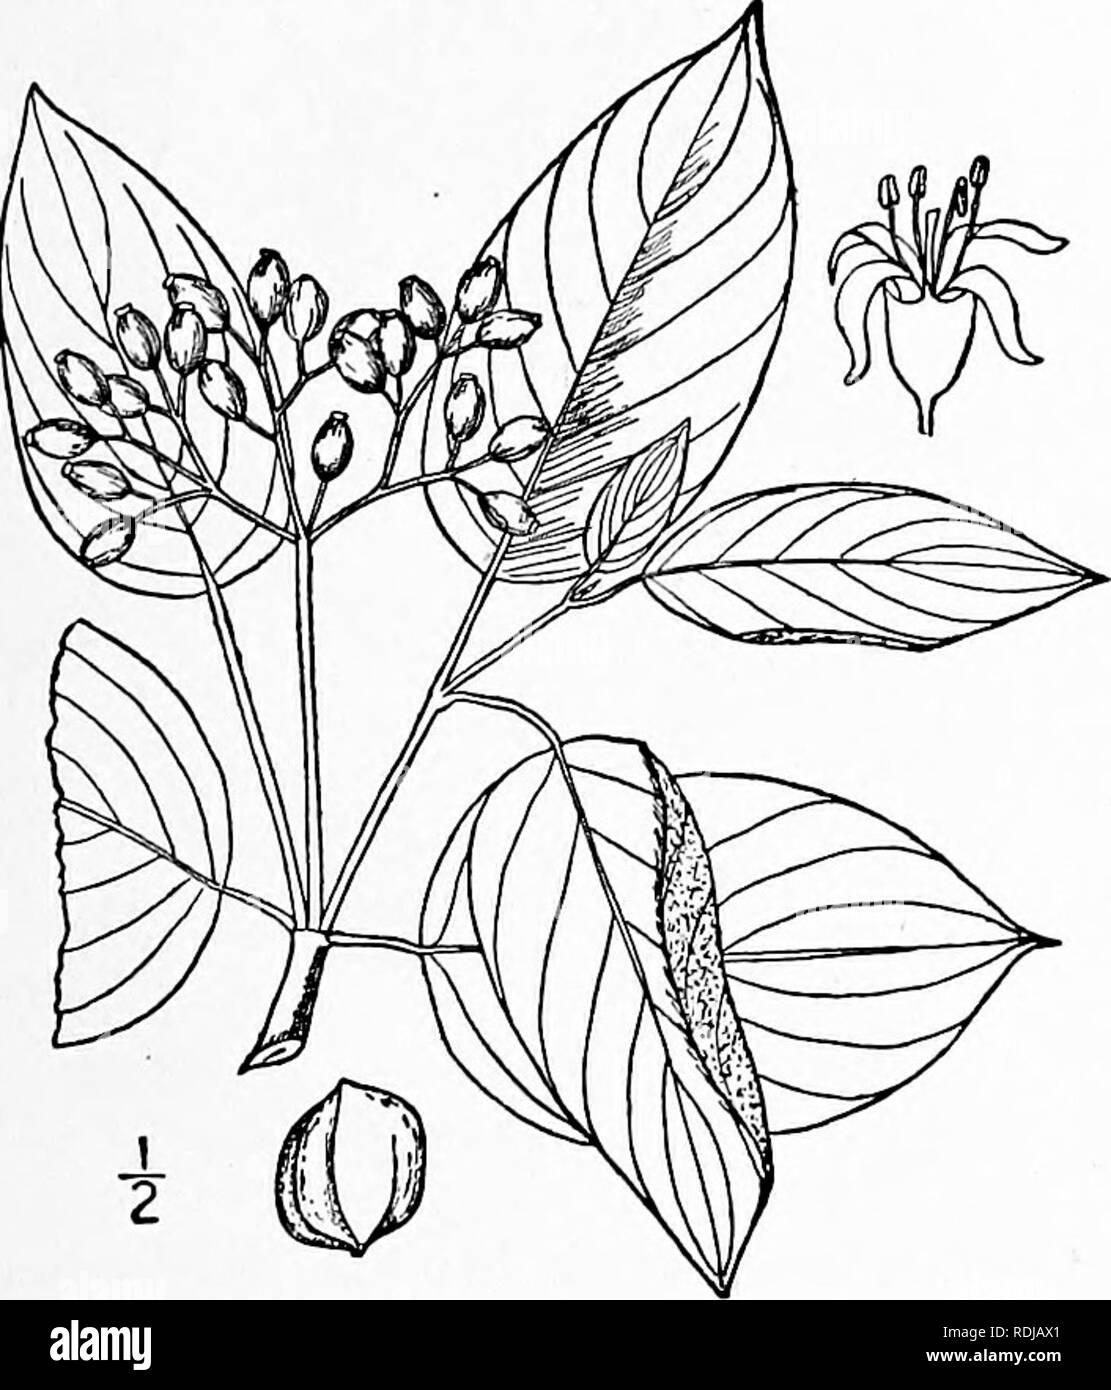 . An illustrated flora of the northern United States, Canada and the British possessions, from Newfoundland to the parallel of the southern boundary of Virginia, and from the Atlantic Ocean westward to the 102d meridian. Botany; Botany. Genus i. DOGWOOD FAMILY. 661 I. Cornus rugosa Lam. Round-leaved Cornel or Dogwood. Fig. 3180. Cornus rugosa Lam. Encycl. 2: 115. 1786. C. circinata L'Her. Cornus, 7. pi. 3. 1788. A shrub, 3°-io° high, the twigs warty, green and glabrous. Leaves petioled, entire, broadly ovate, orbicular, or even wider than long, acute, or short-acuminate at the apex, mostly rou Stock Photo